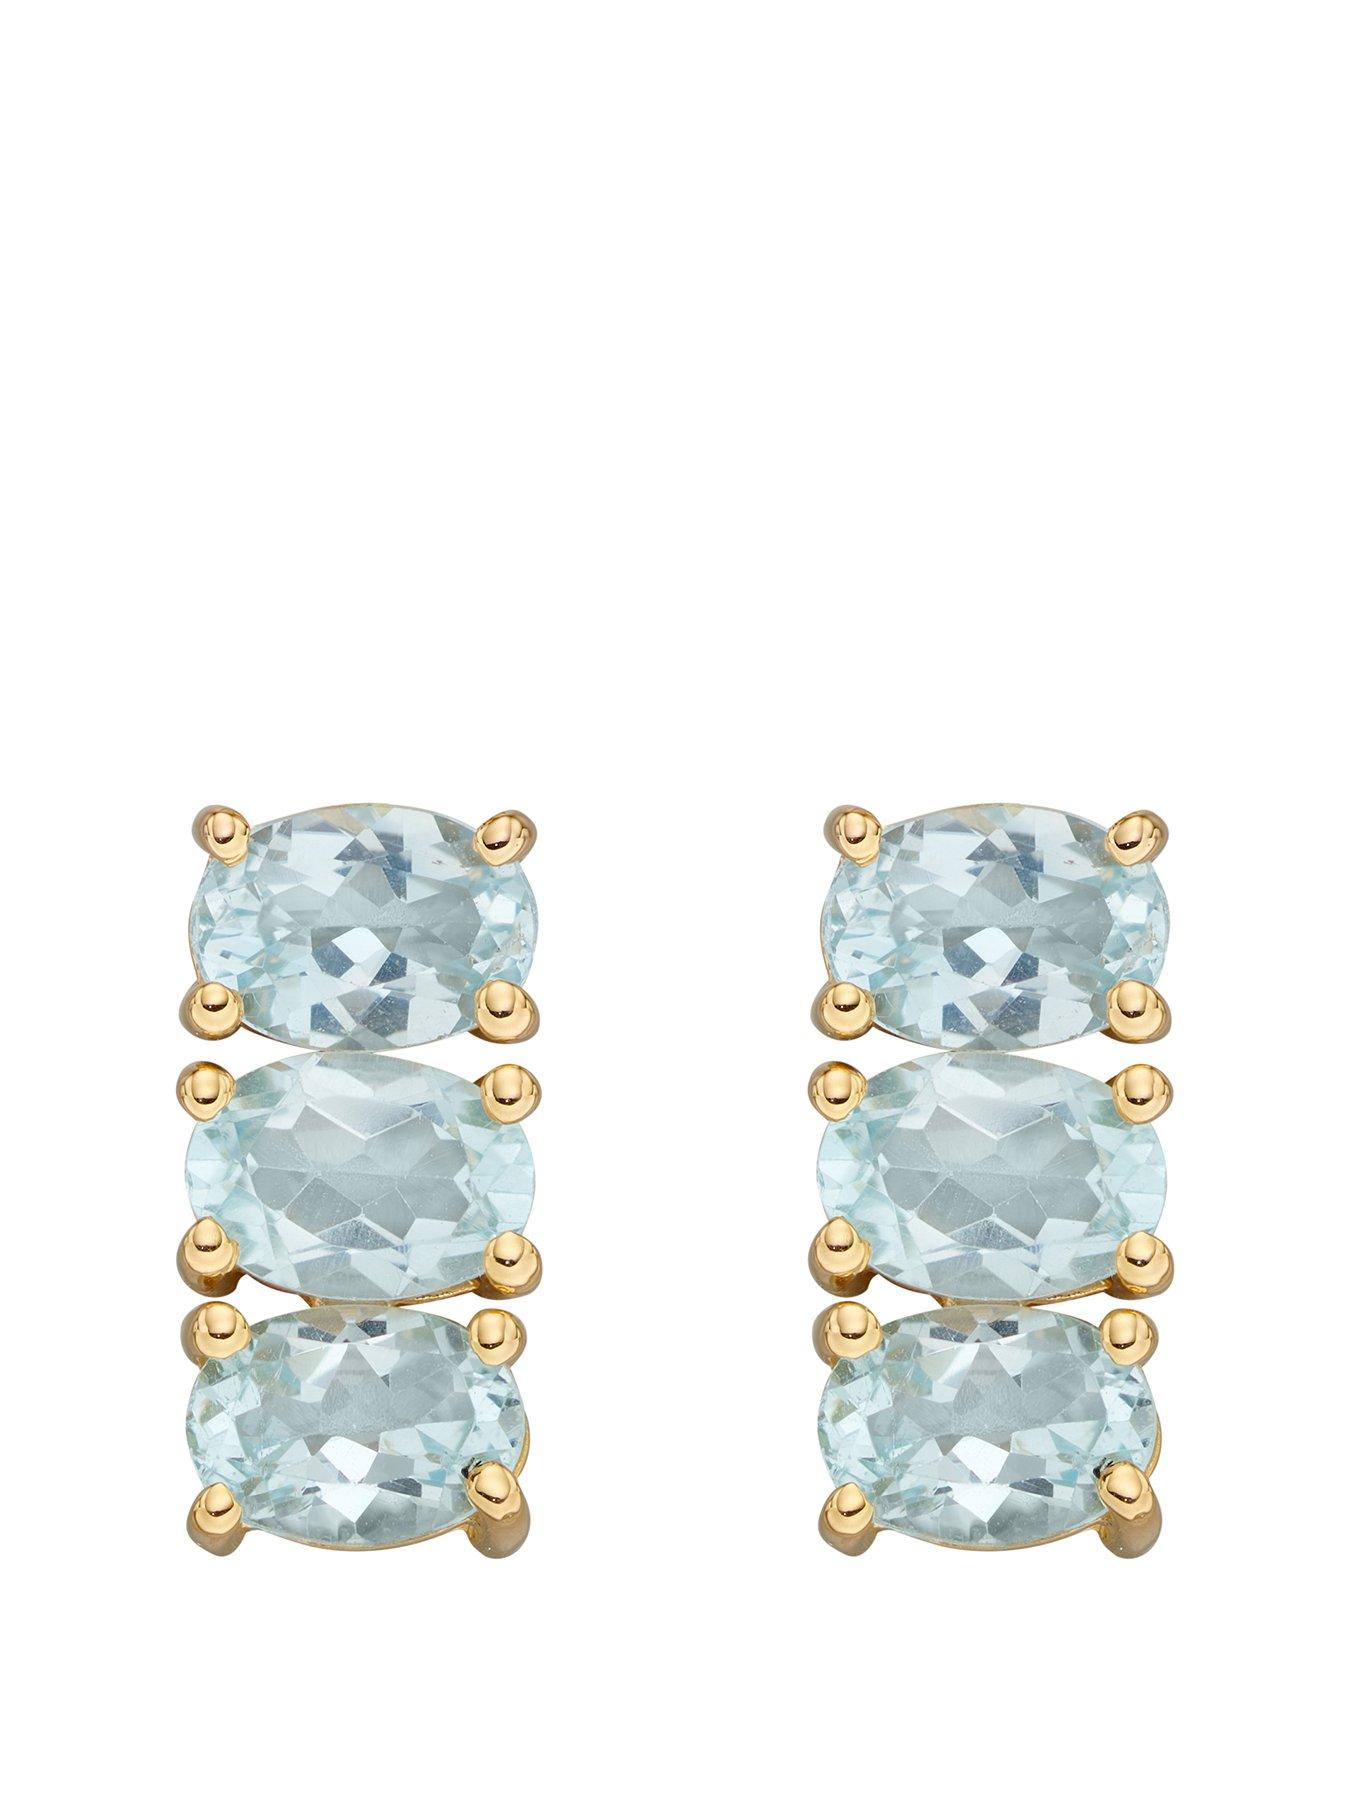  Gold Plated Sky Blue Topaz Square Cut Trilogy Stud Earrings